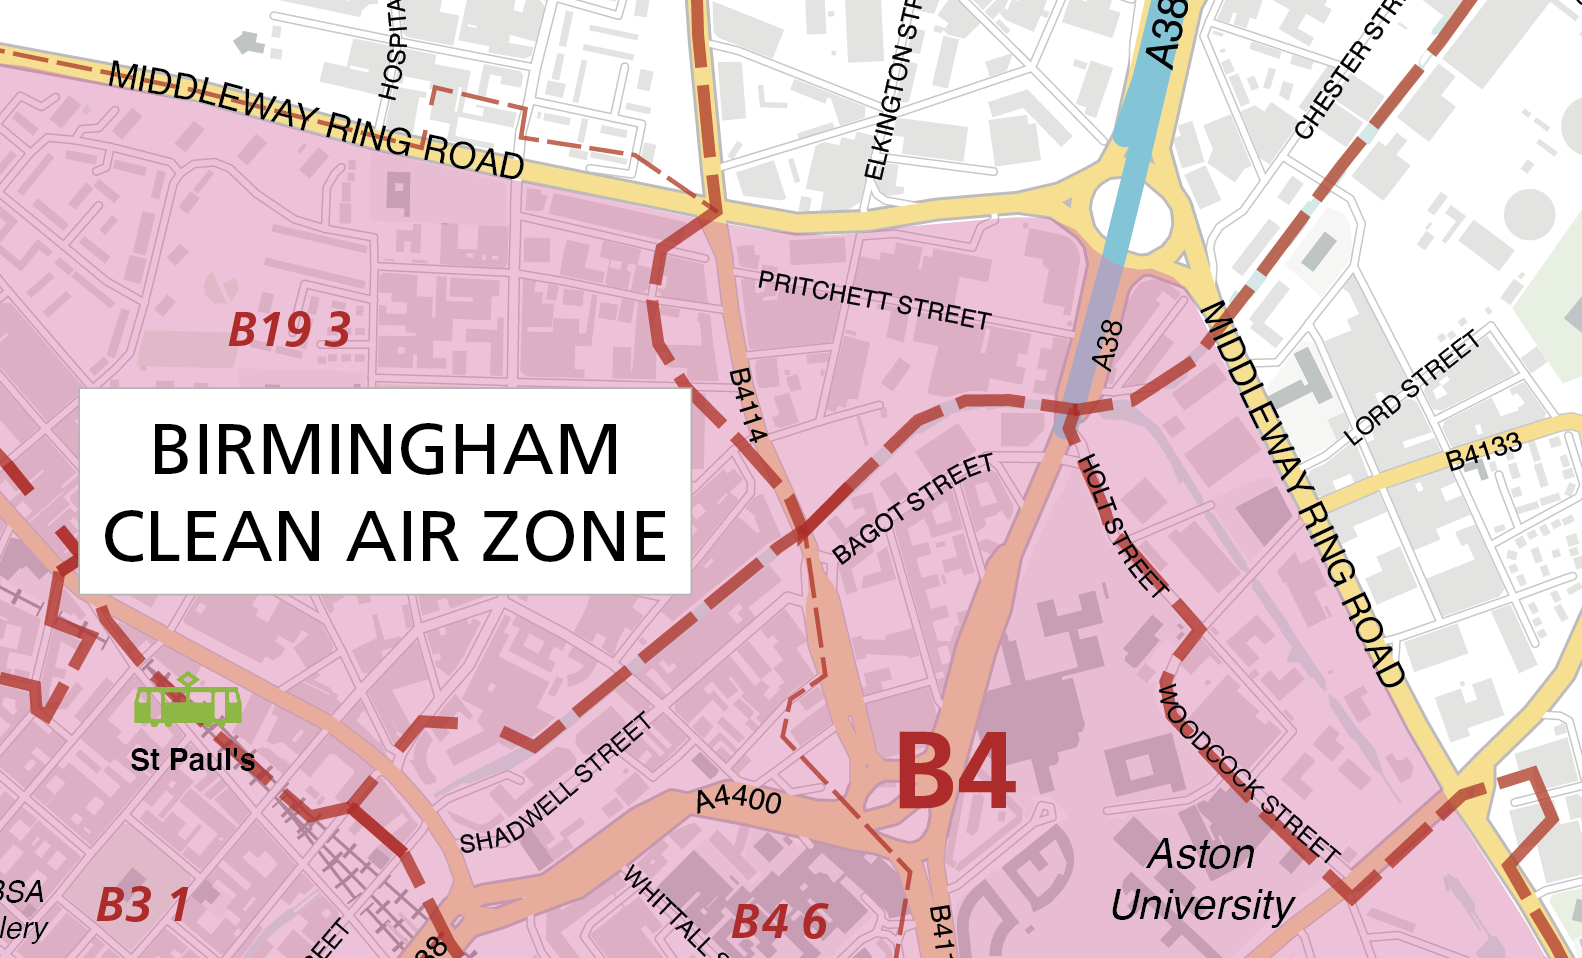 Map Of Birmingham Clean Air Zone With Streets And Pos - vrogue.co